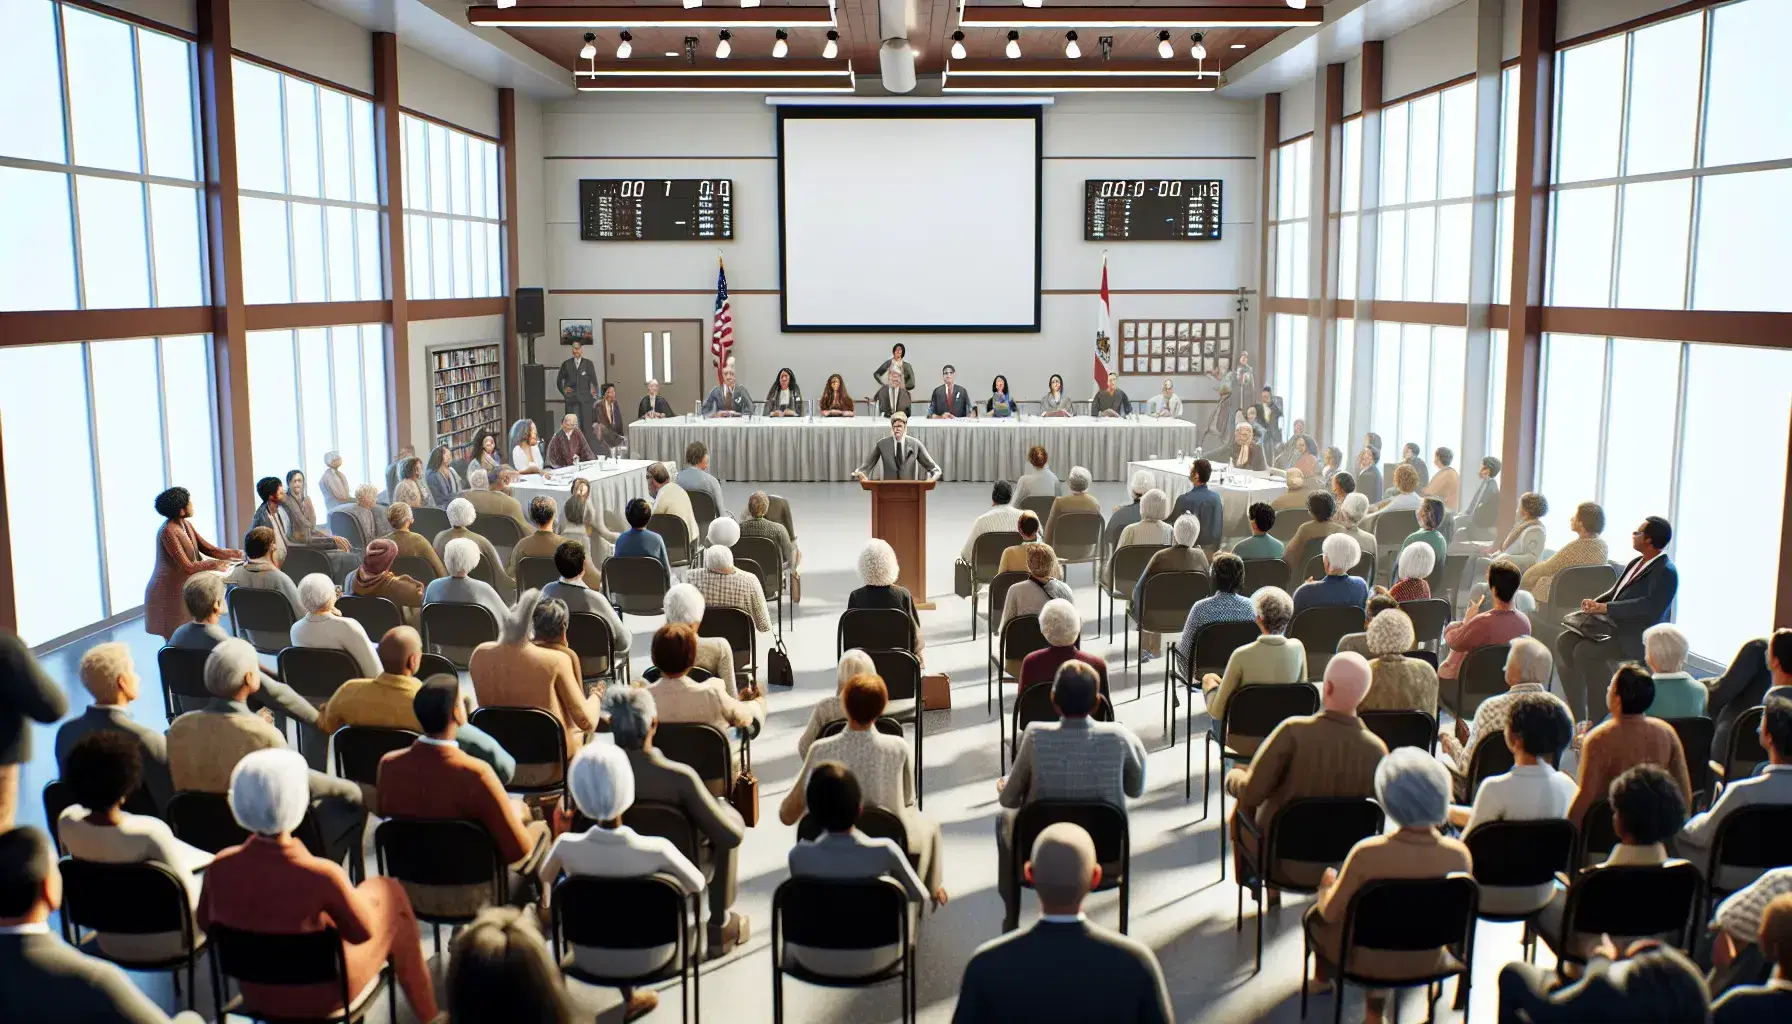 Diverse community members attentively seated at a town hall meeting with a speaker at the podium, a blank projection screen to the side, in a well-lit room with large windows.